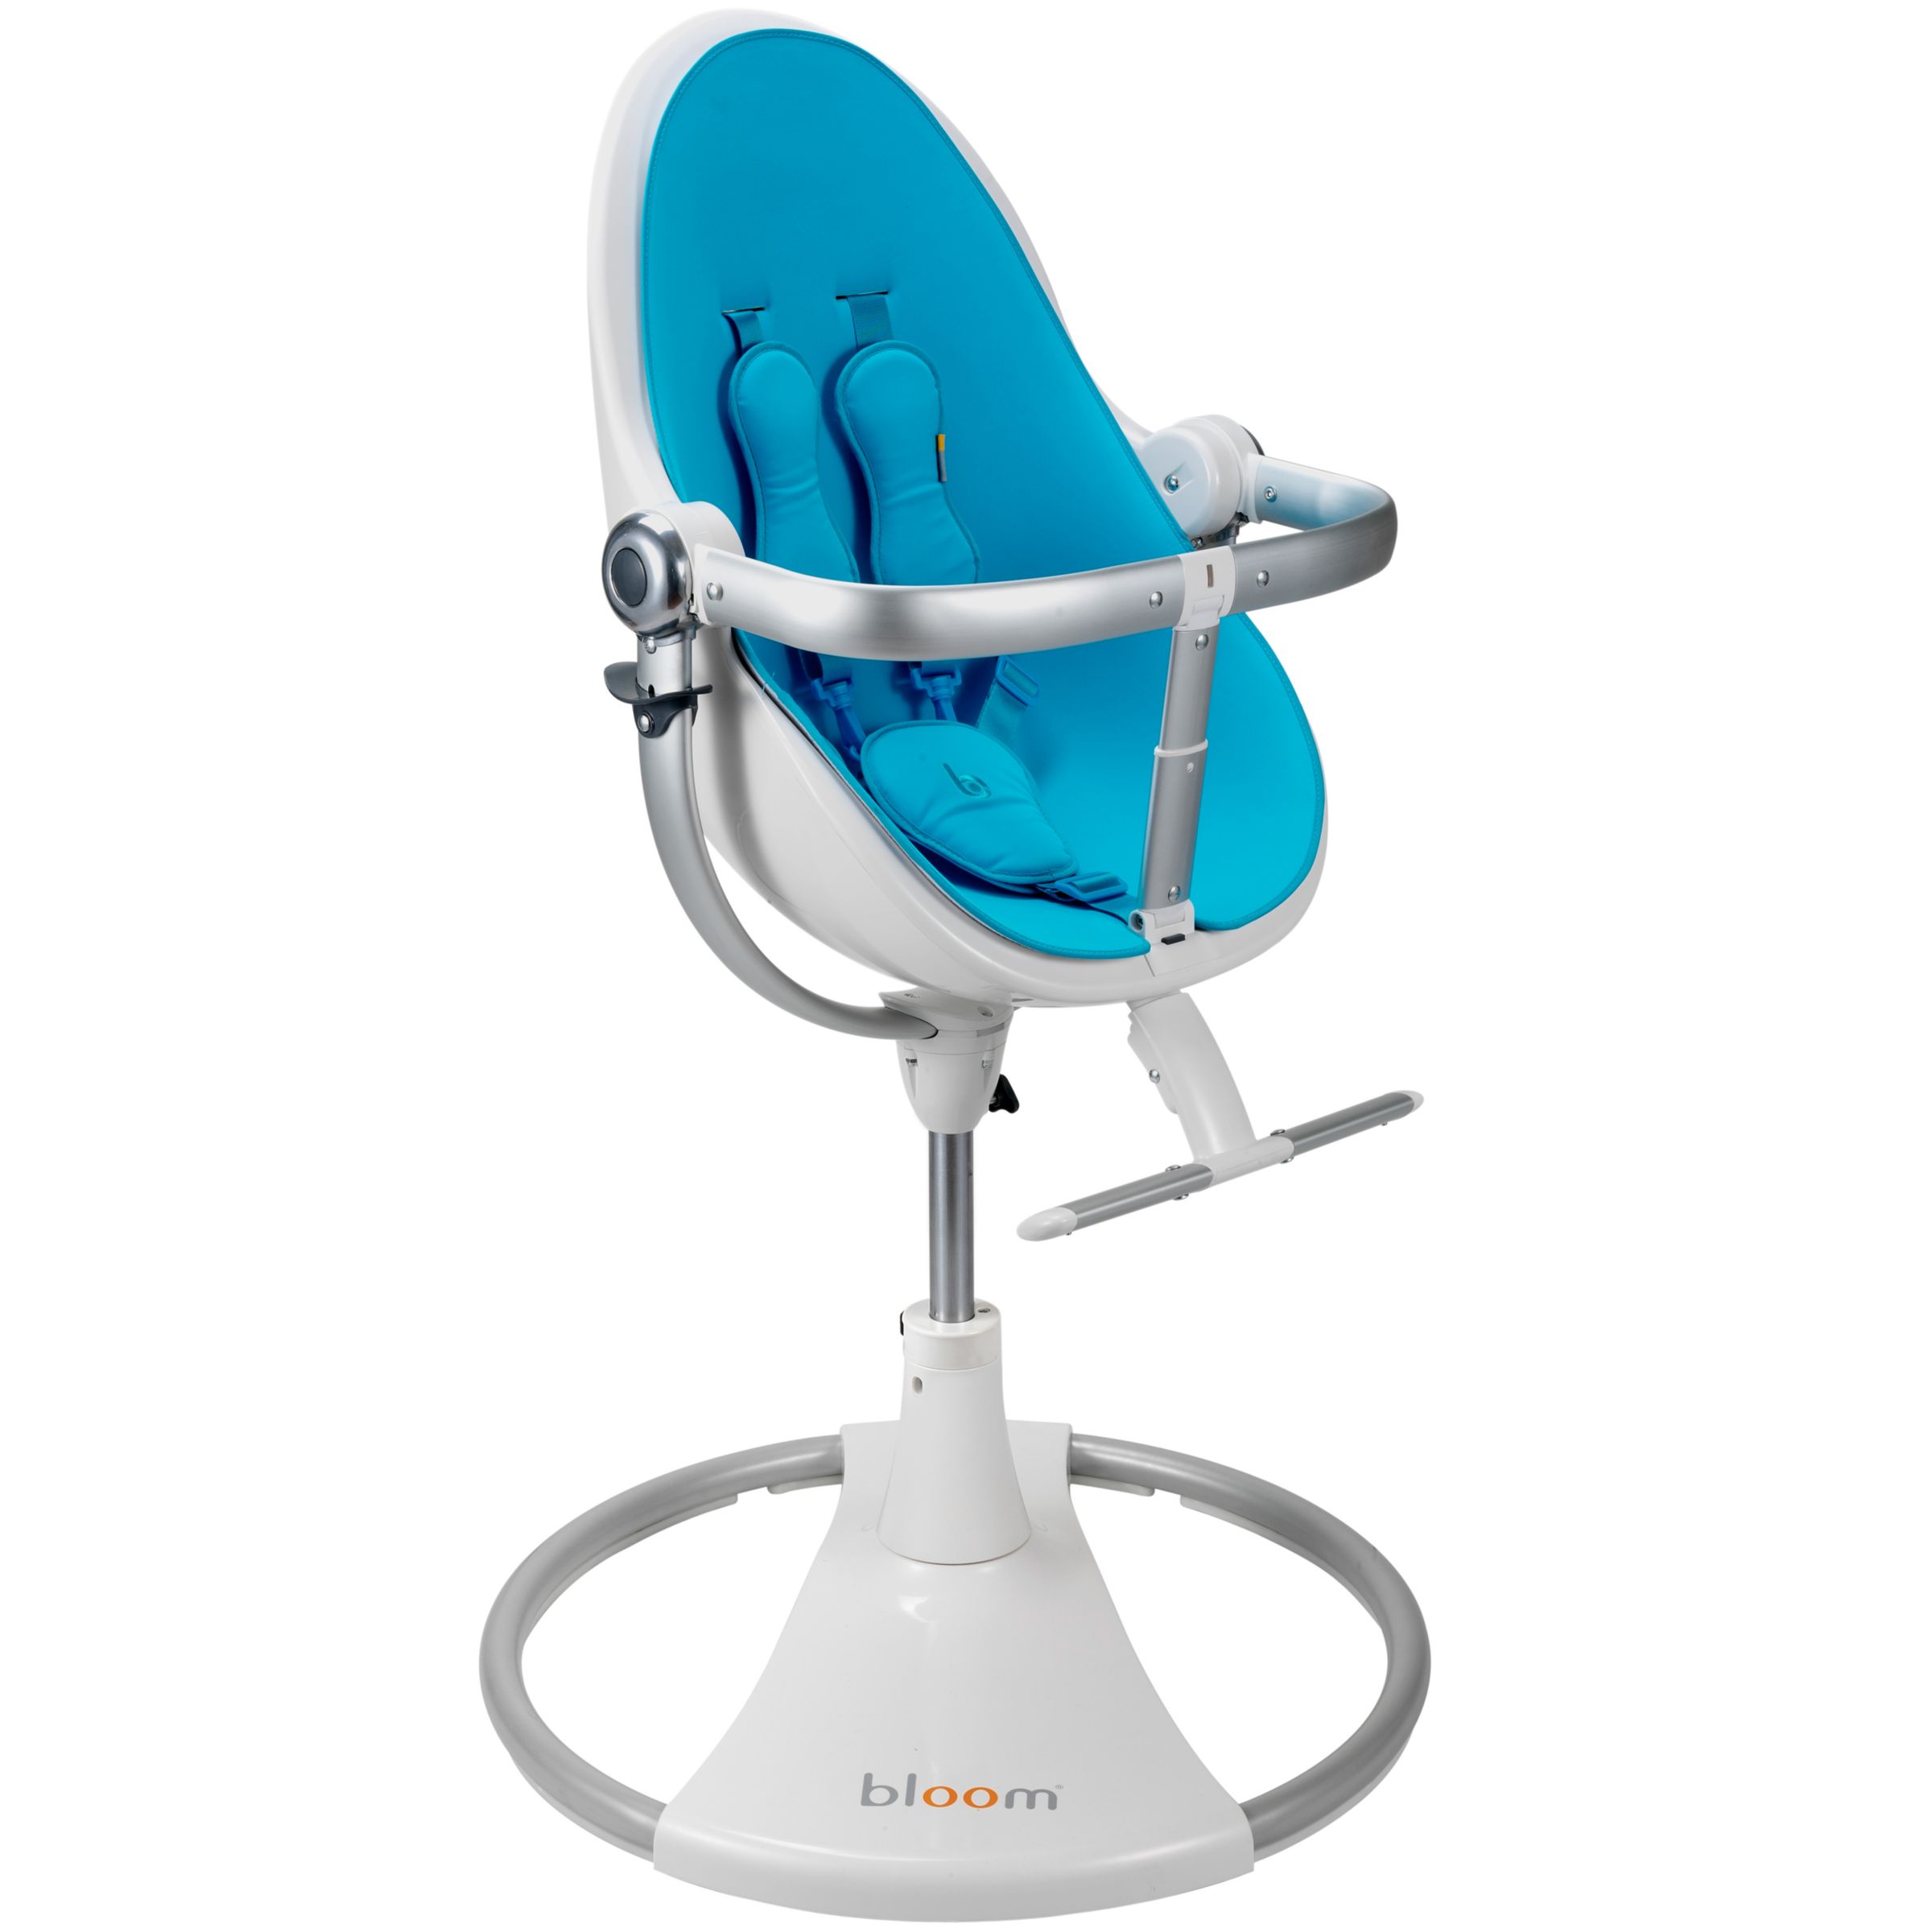 bloom Fresco Classic Contemporary Leatherette Baby Chair, Bermuda Blue at JohnLewis